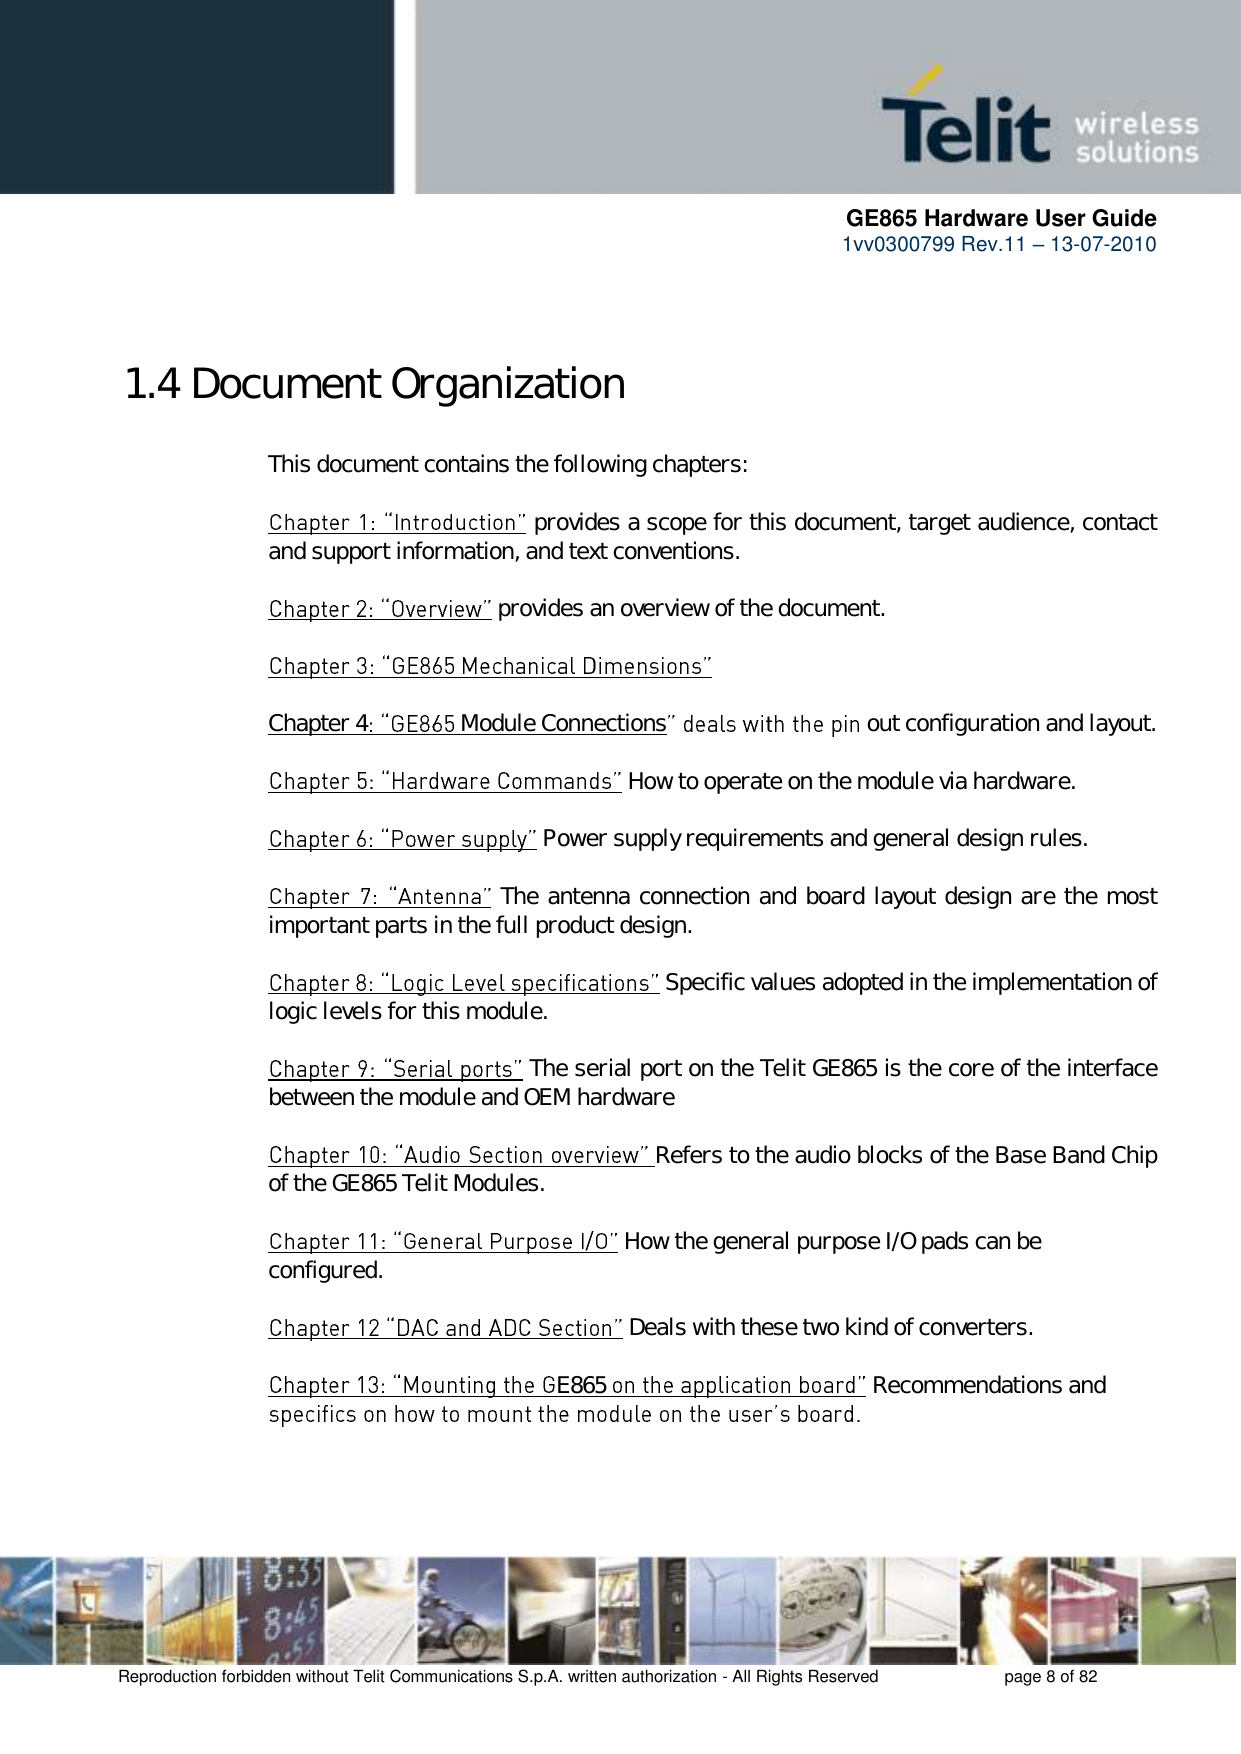      GE865 Hardware User Guide 1vv0300799 Rev.11 – 13-07-2010       Reproduction forbidden without Telit Communications S.p.A. written authorization - All Rights Reserved    page 8 of 82   1.4 Document Organization  This document contains the following chapters:   provides a scope for this document, target audience, contact and support information, and text conventions.   provides an overview of the document.      Chapter 4  Module Connections  out configuration and layout.   How to operate on the module via hardware.   Power supply requirements and general design rules.   The antenna connection and board layout design are the most important parts in the full product design.   Specific values adopted in the implementation of logic levels for this module.             The serial port on the Telit GE865 is the core of the interface between the module and OEM hardware  Refers to the audio blocks of the Base Band Chip of the GE865 Telit Modules.   How the general purpose I/O pads can be configured.   Deals with these two kind of converters.  E865   Recommendations and      